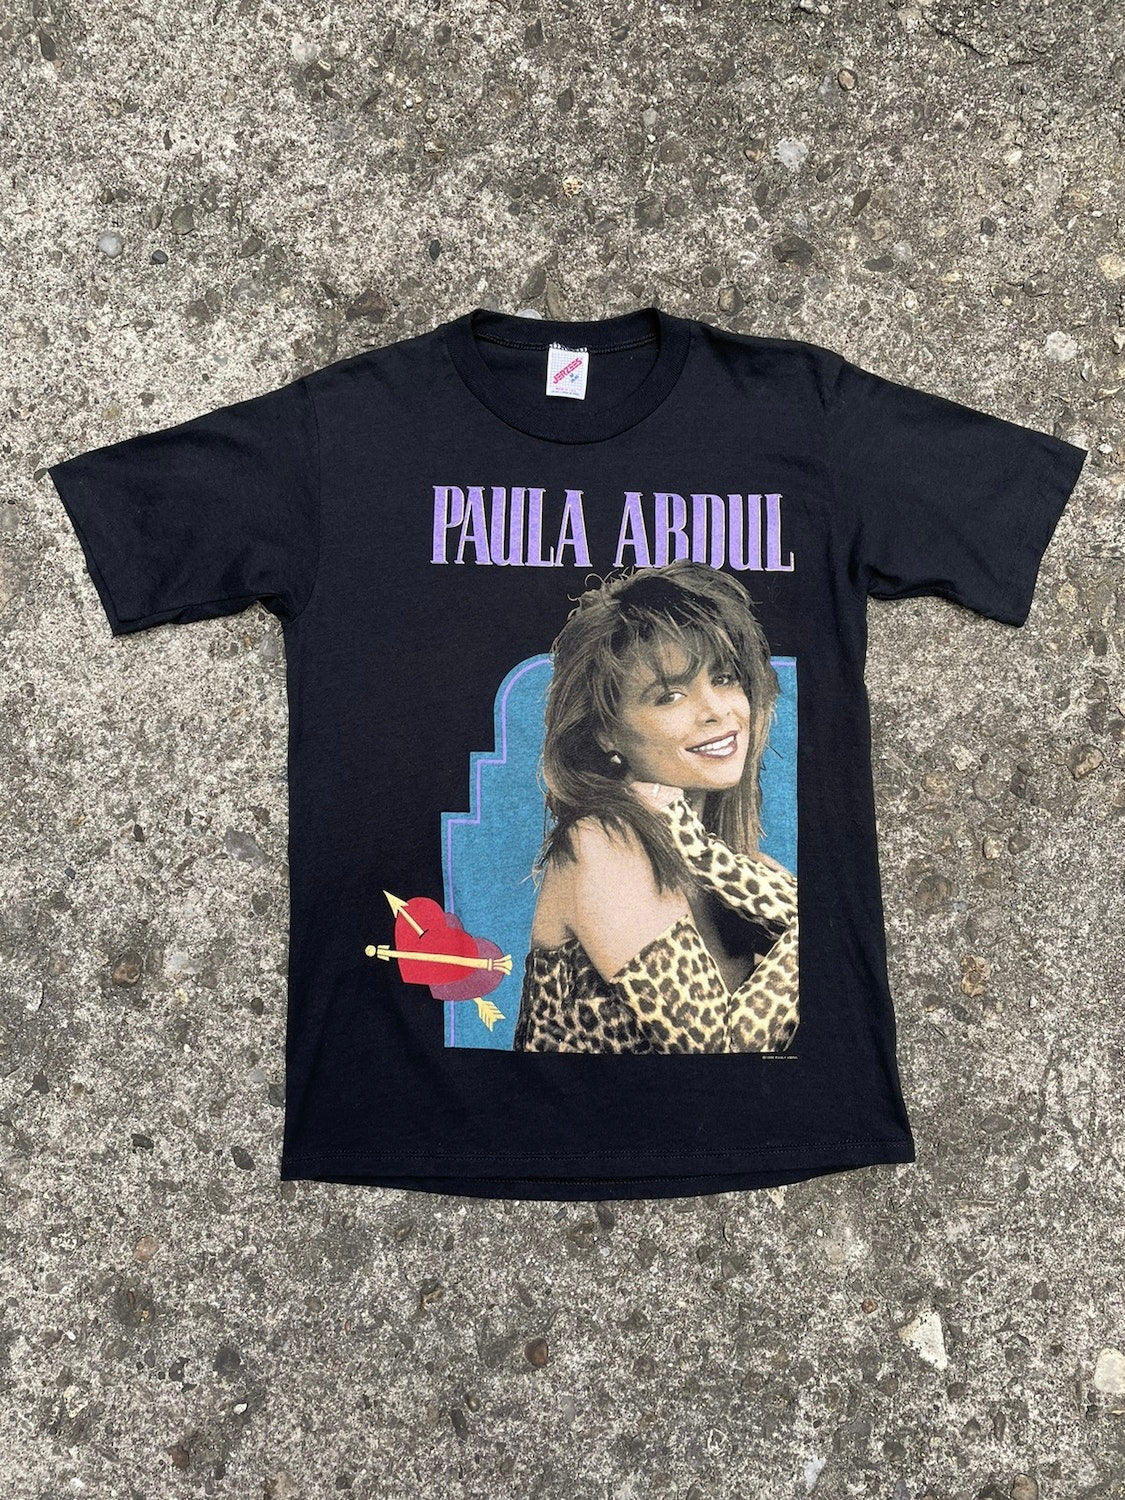 1990 Paula Abdul 'Forever Your Girl' Tour Band T-Shirt - M